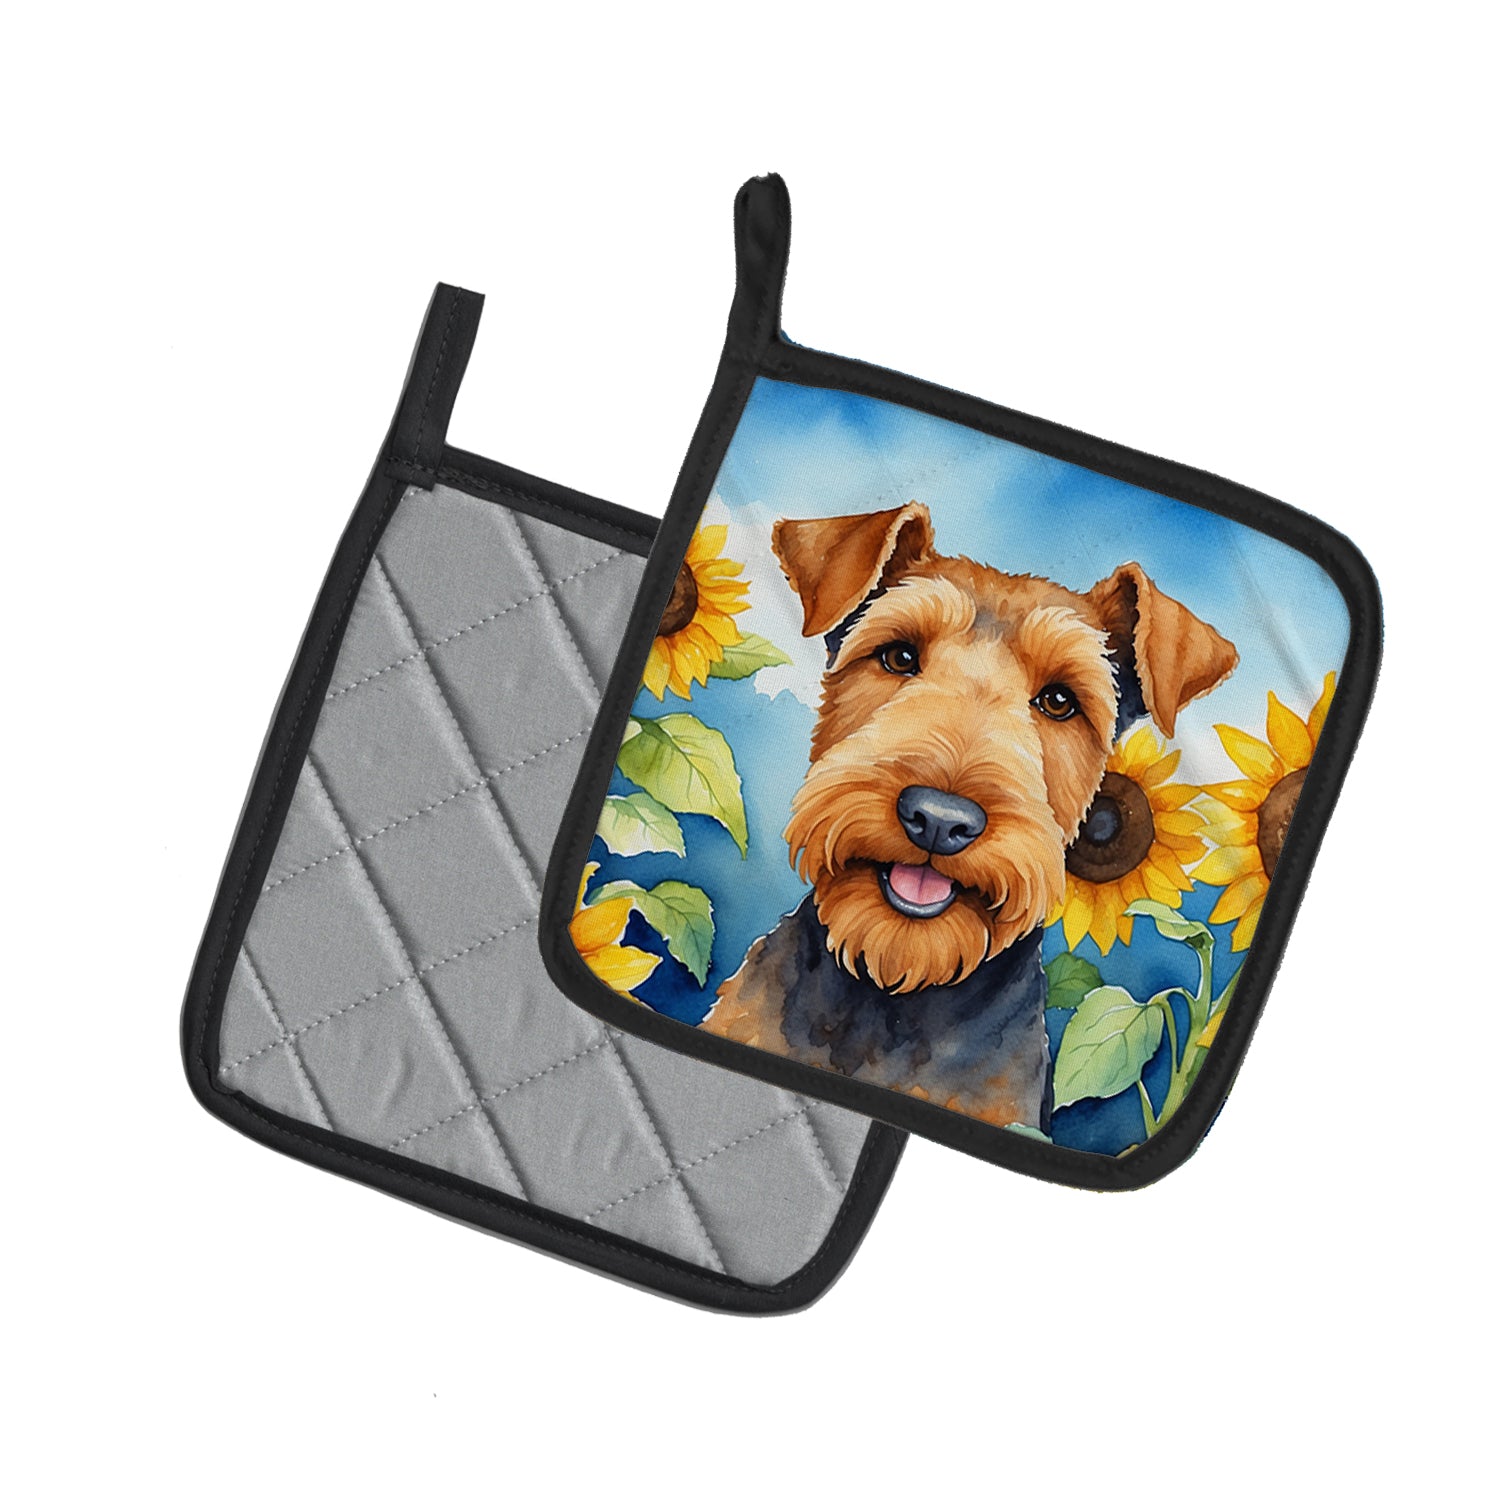 Buy this Airedale Terrier in Sunflowers Pair of Pot Holders